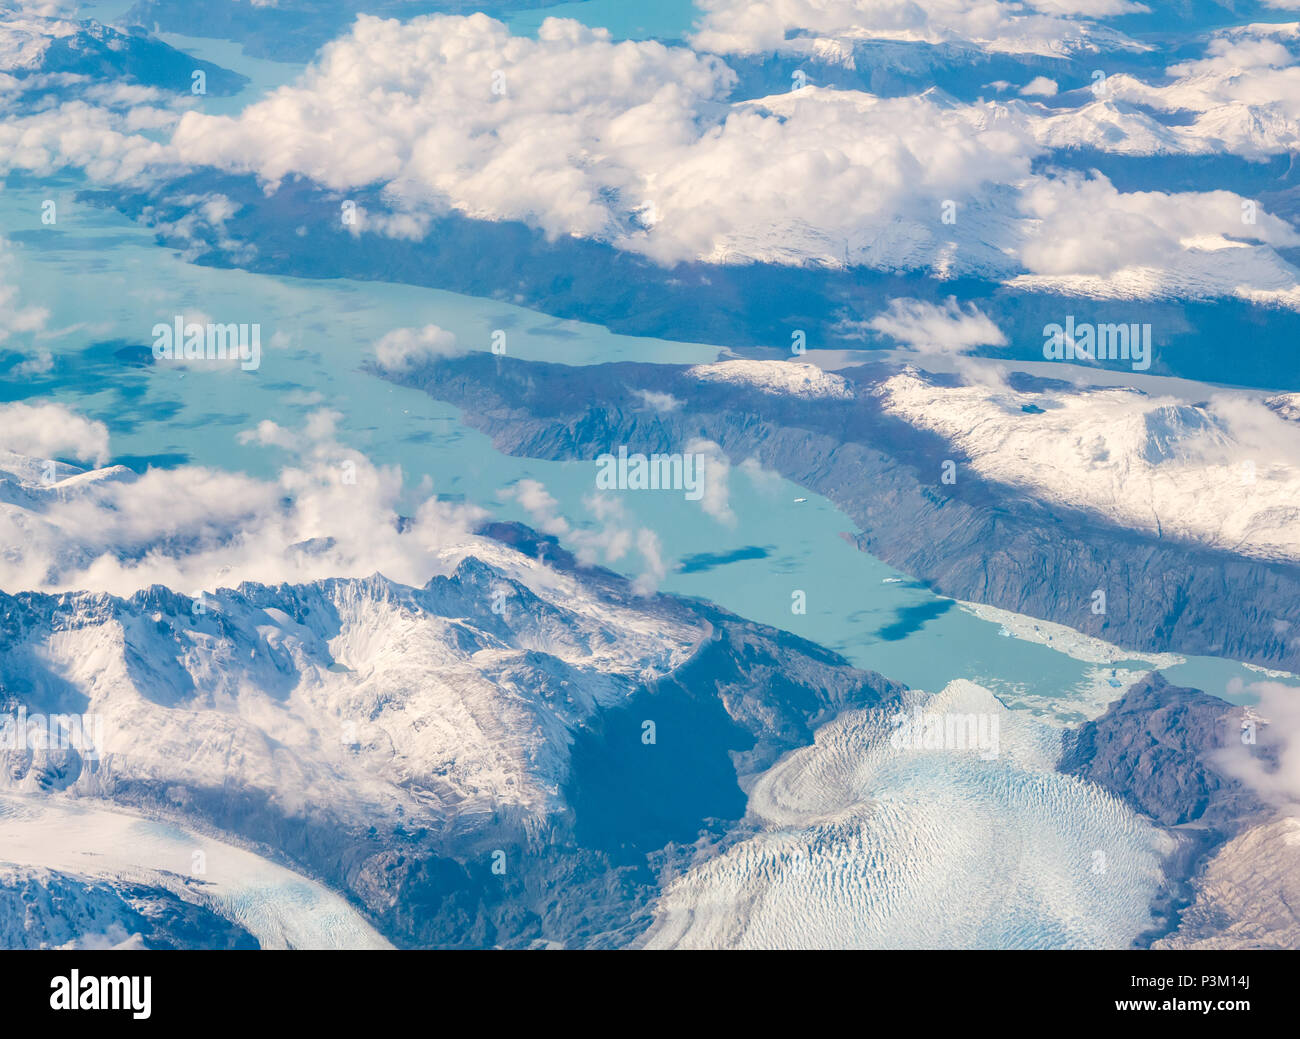 View from aeroplane window of snow covered Andes mountains with lakes, glacier tongues and icebergs, Southern Patagonian Ice field, Patagonia, Chile Stock Photo